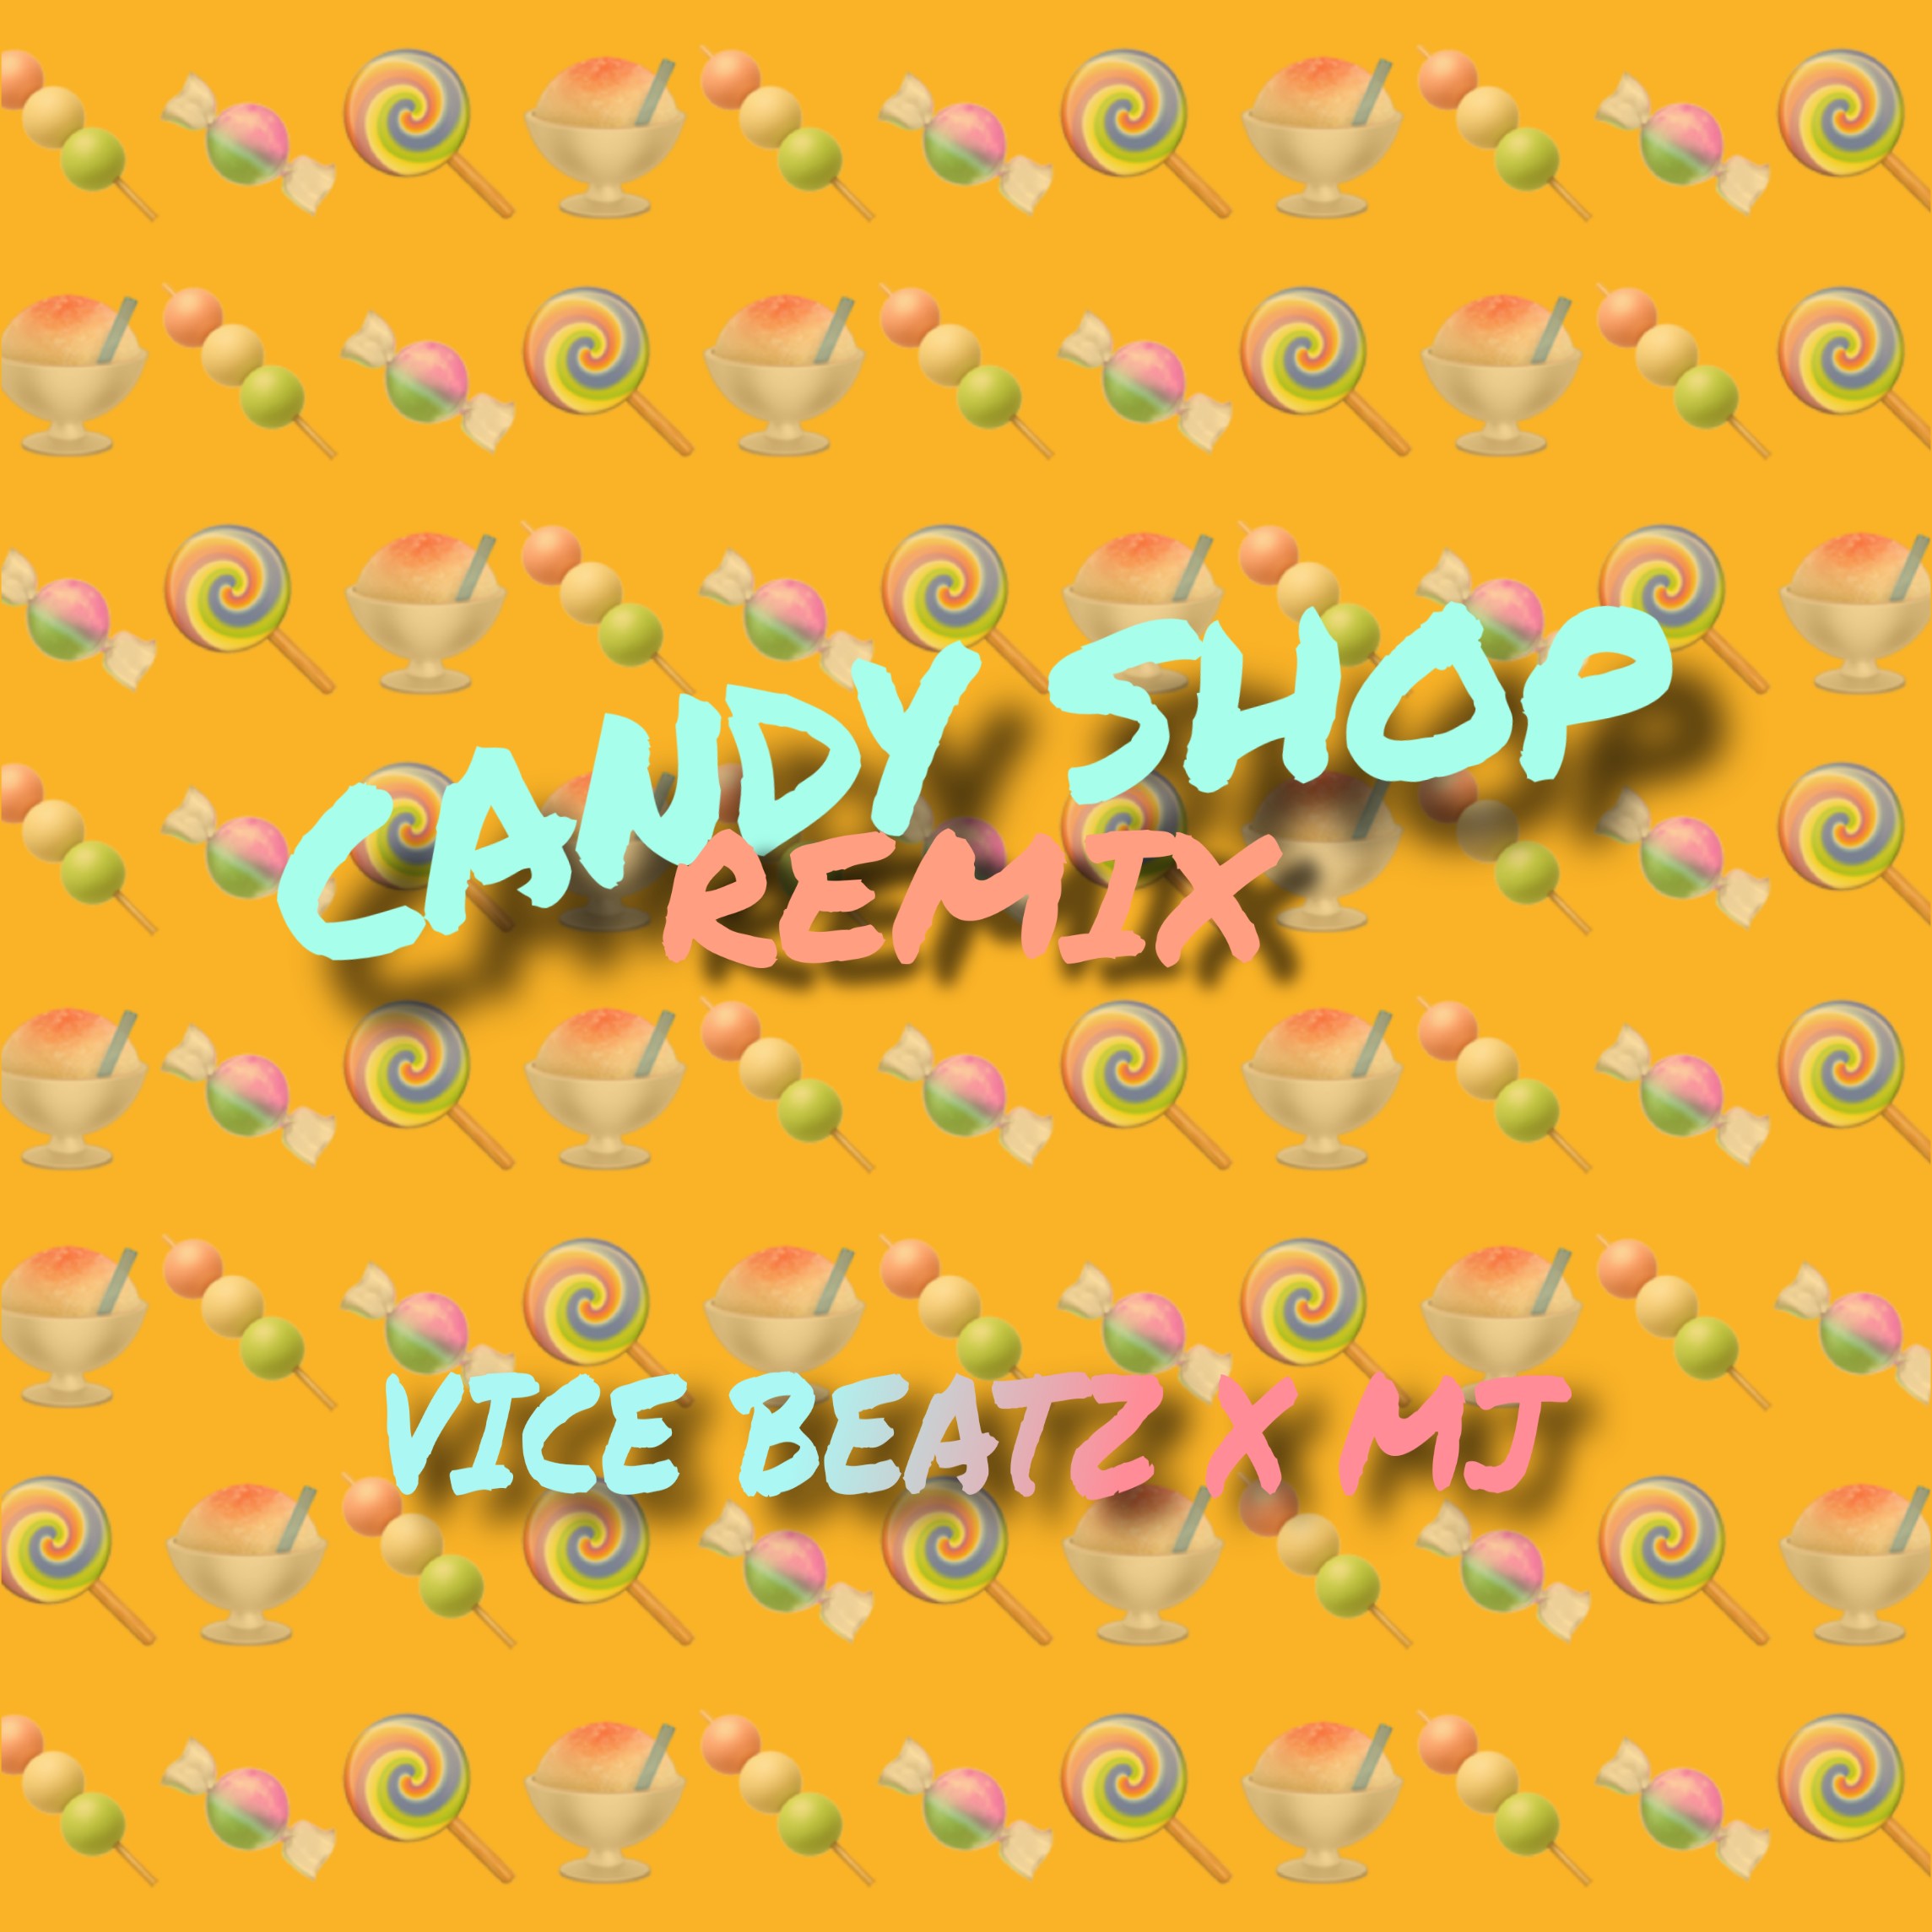 Download Candy Shop (Vice_Beatz & MJ Remix)_ CLICK ON 'BUY' For Free Download